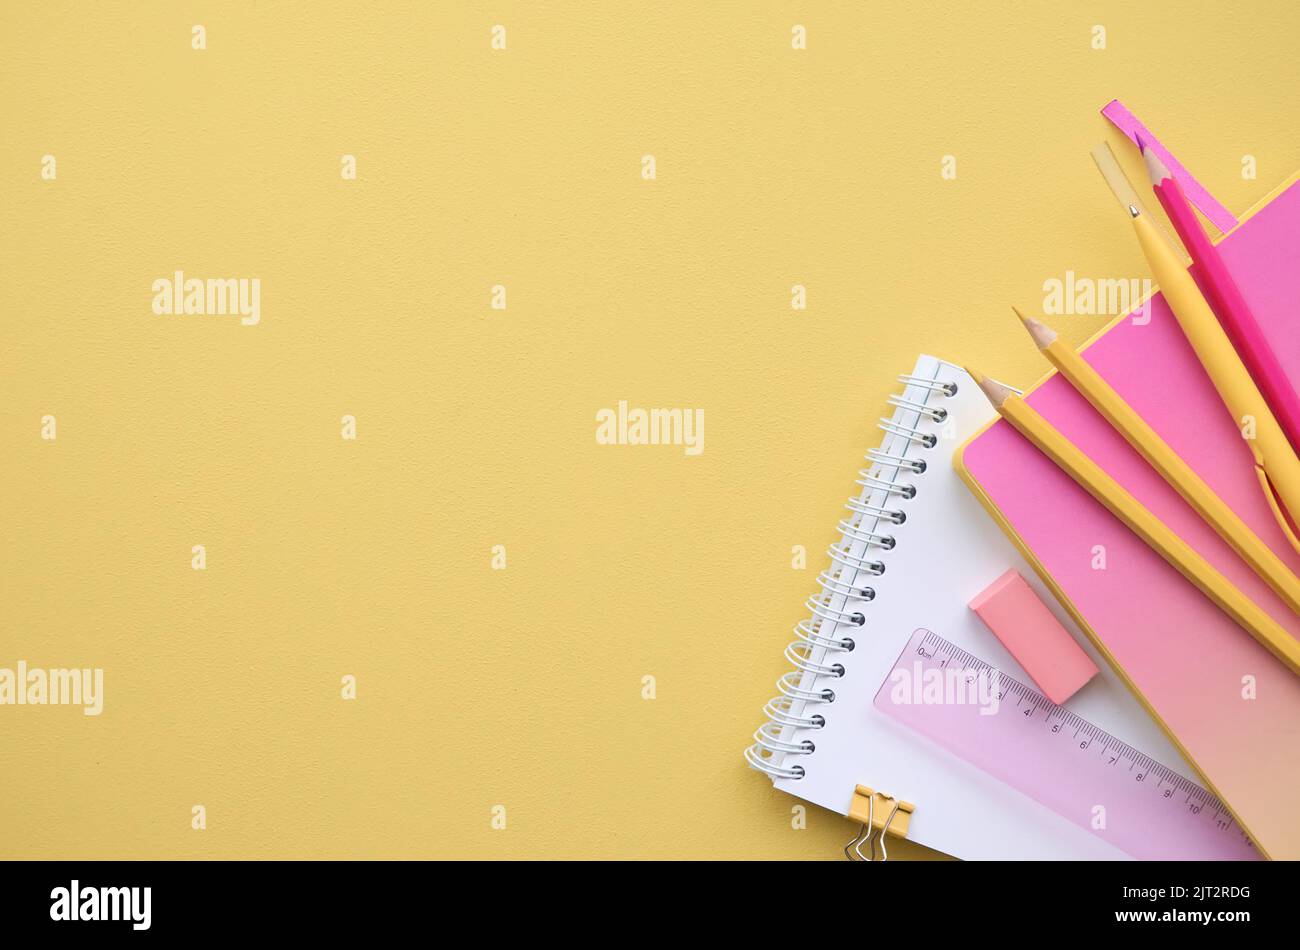 School stationery supplies on yellow pink background, flatlay. Back to school Stock Photo